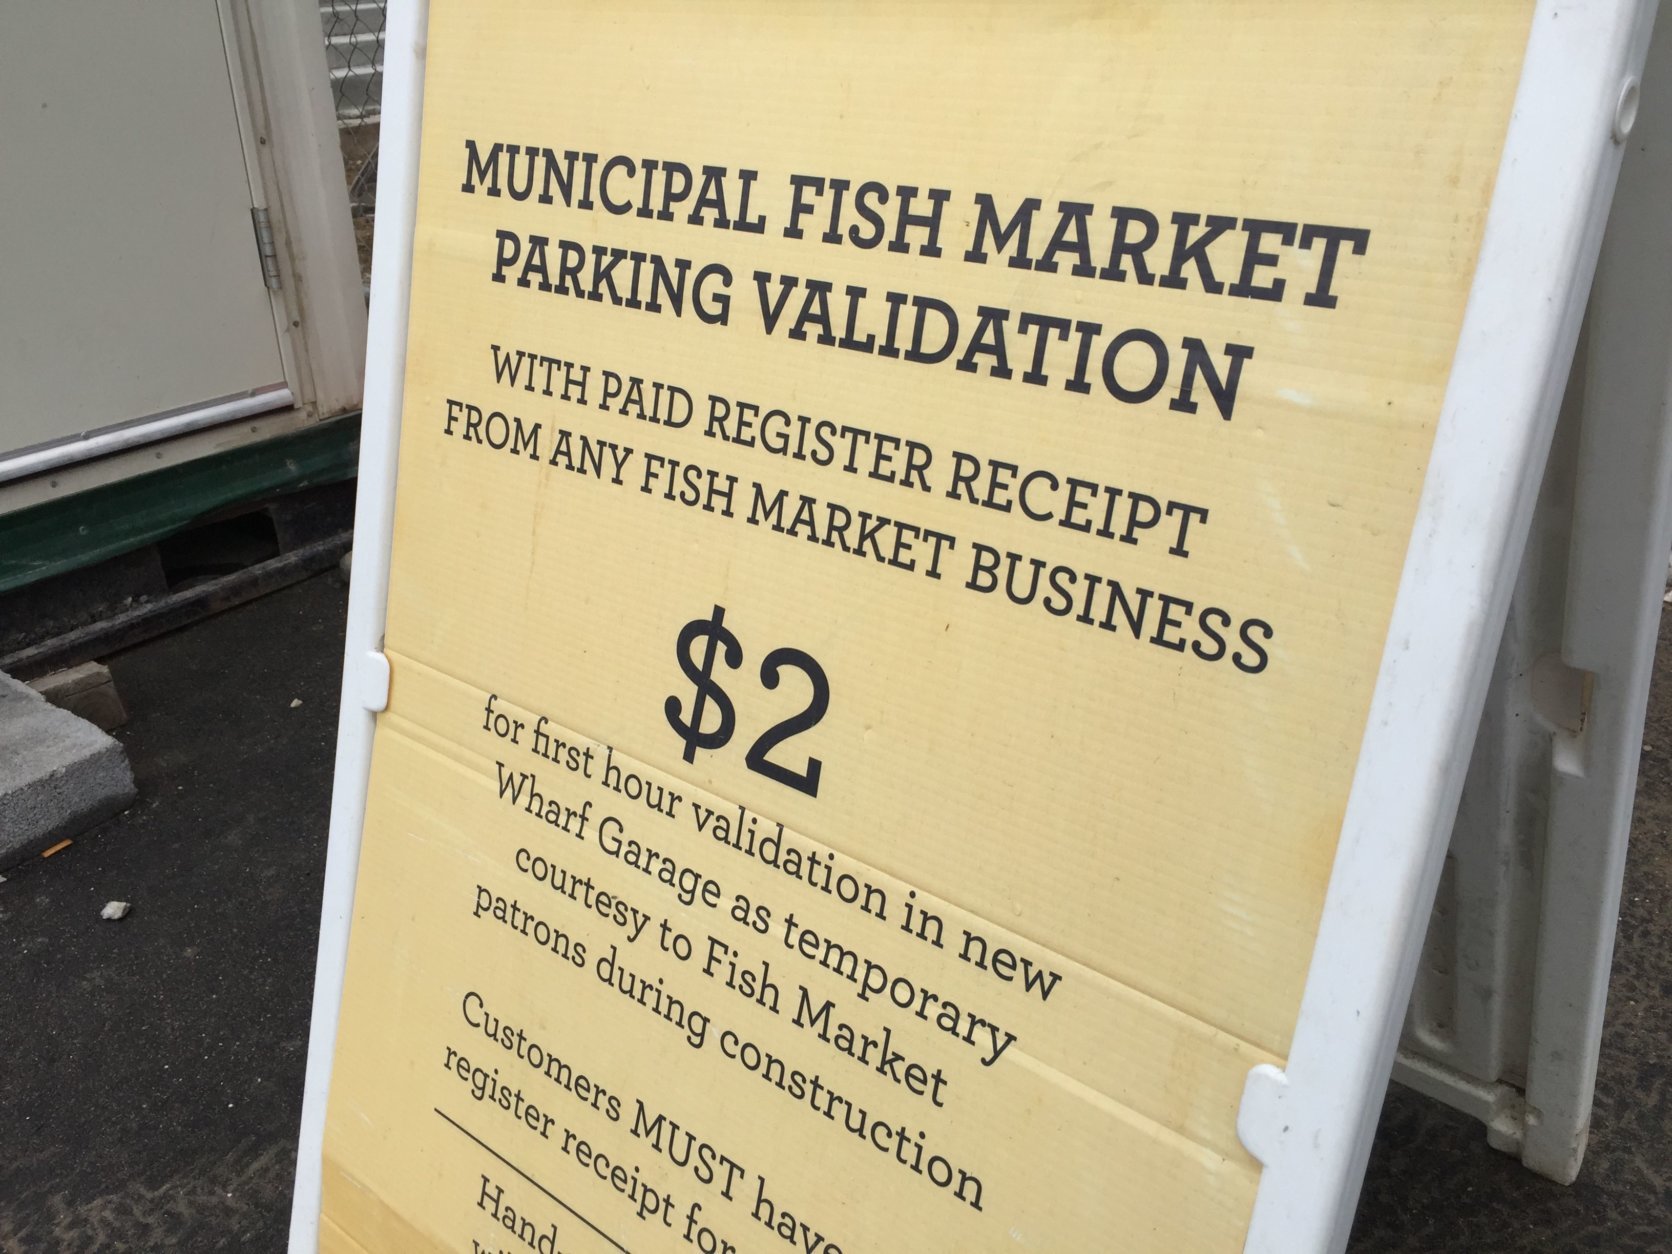 Construction at The Wharf has eliminated parking spaces immediately in front of the Fish Market, but you can still get an affordable spot with validation. (WTOP/Kristi King)